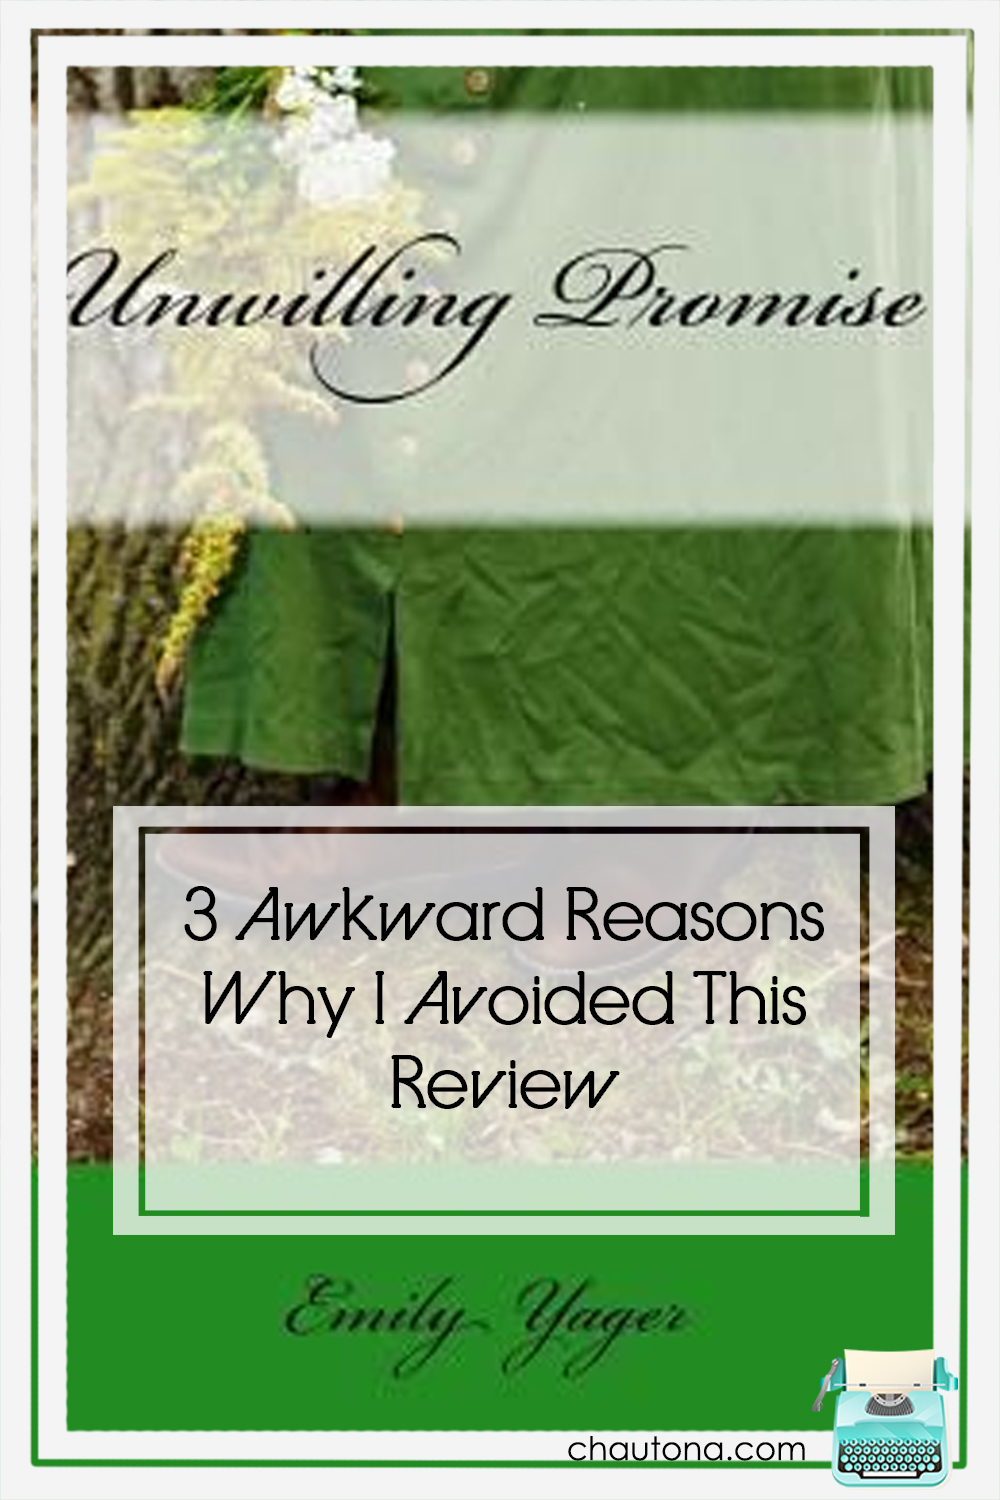 3 Awkward Reasons Why I Avoided This Review- unwilling promise